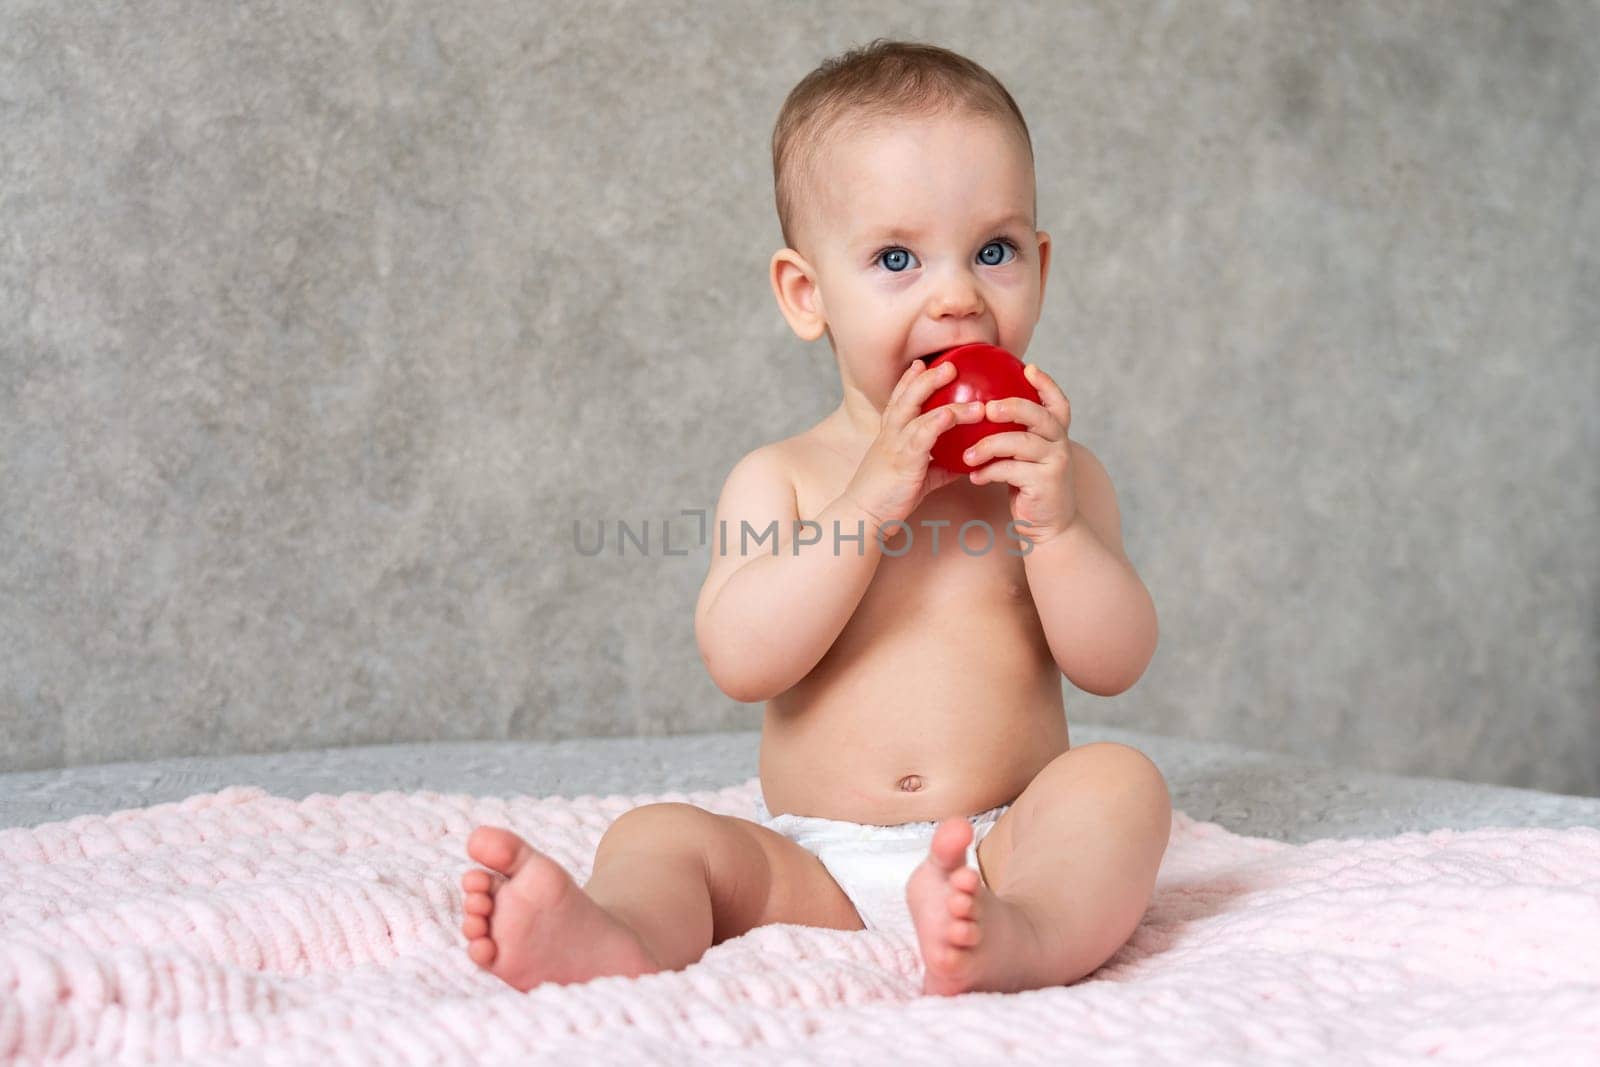 A kid with cheerful eyes is licking a small toy red ball with concentration.